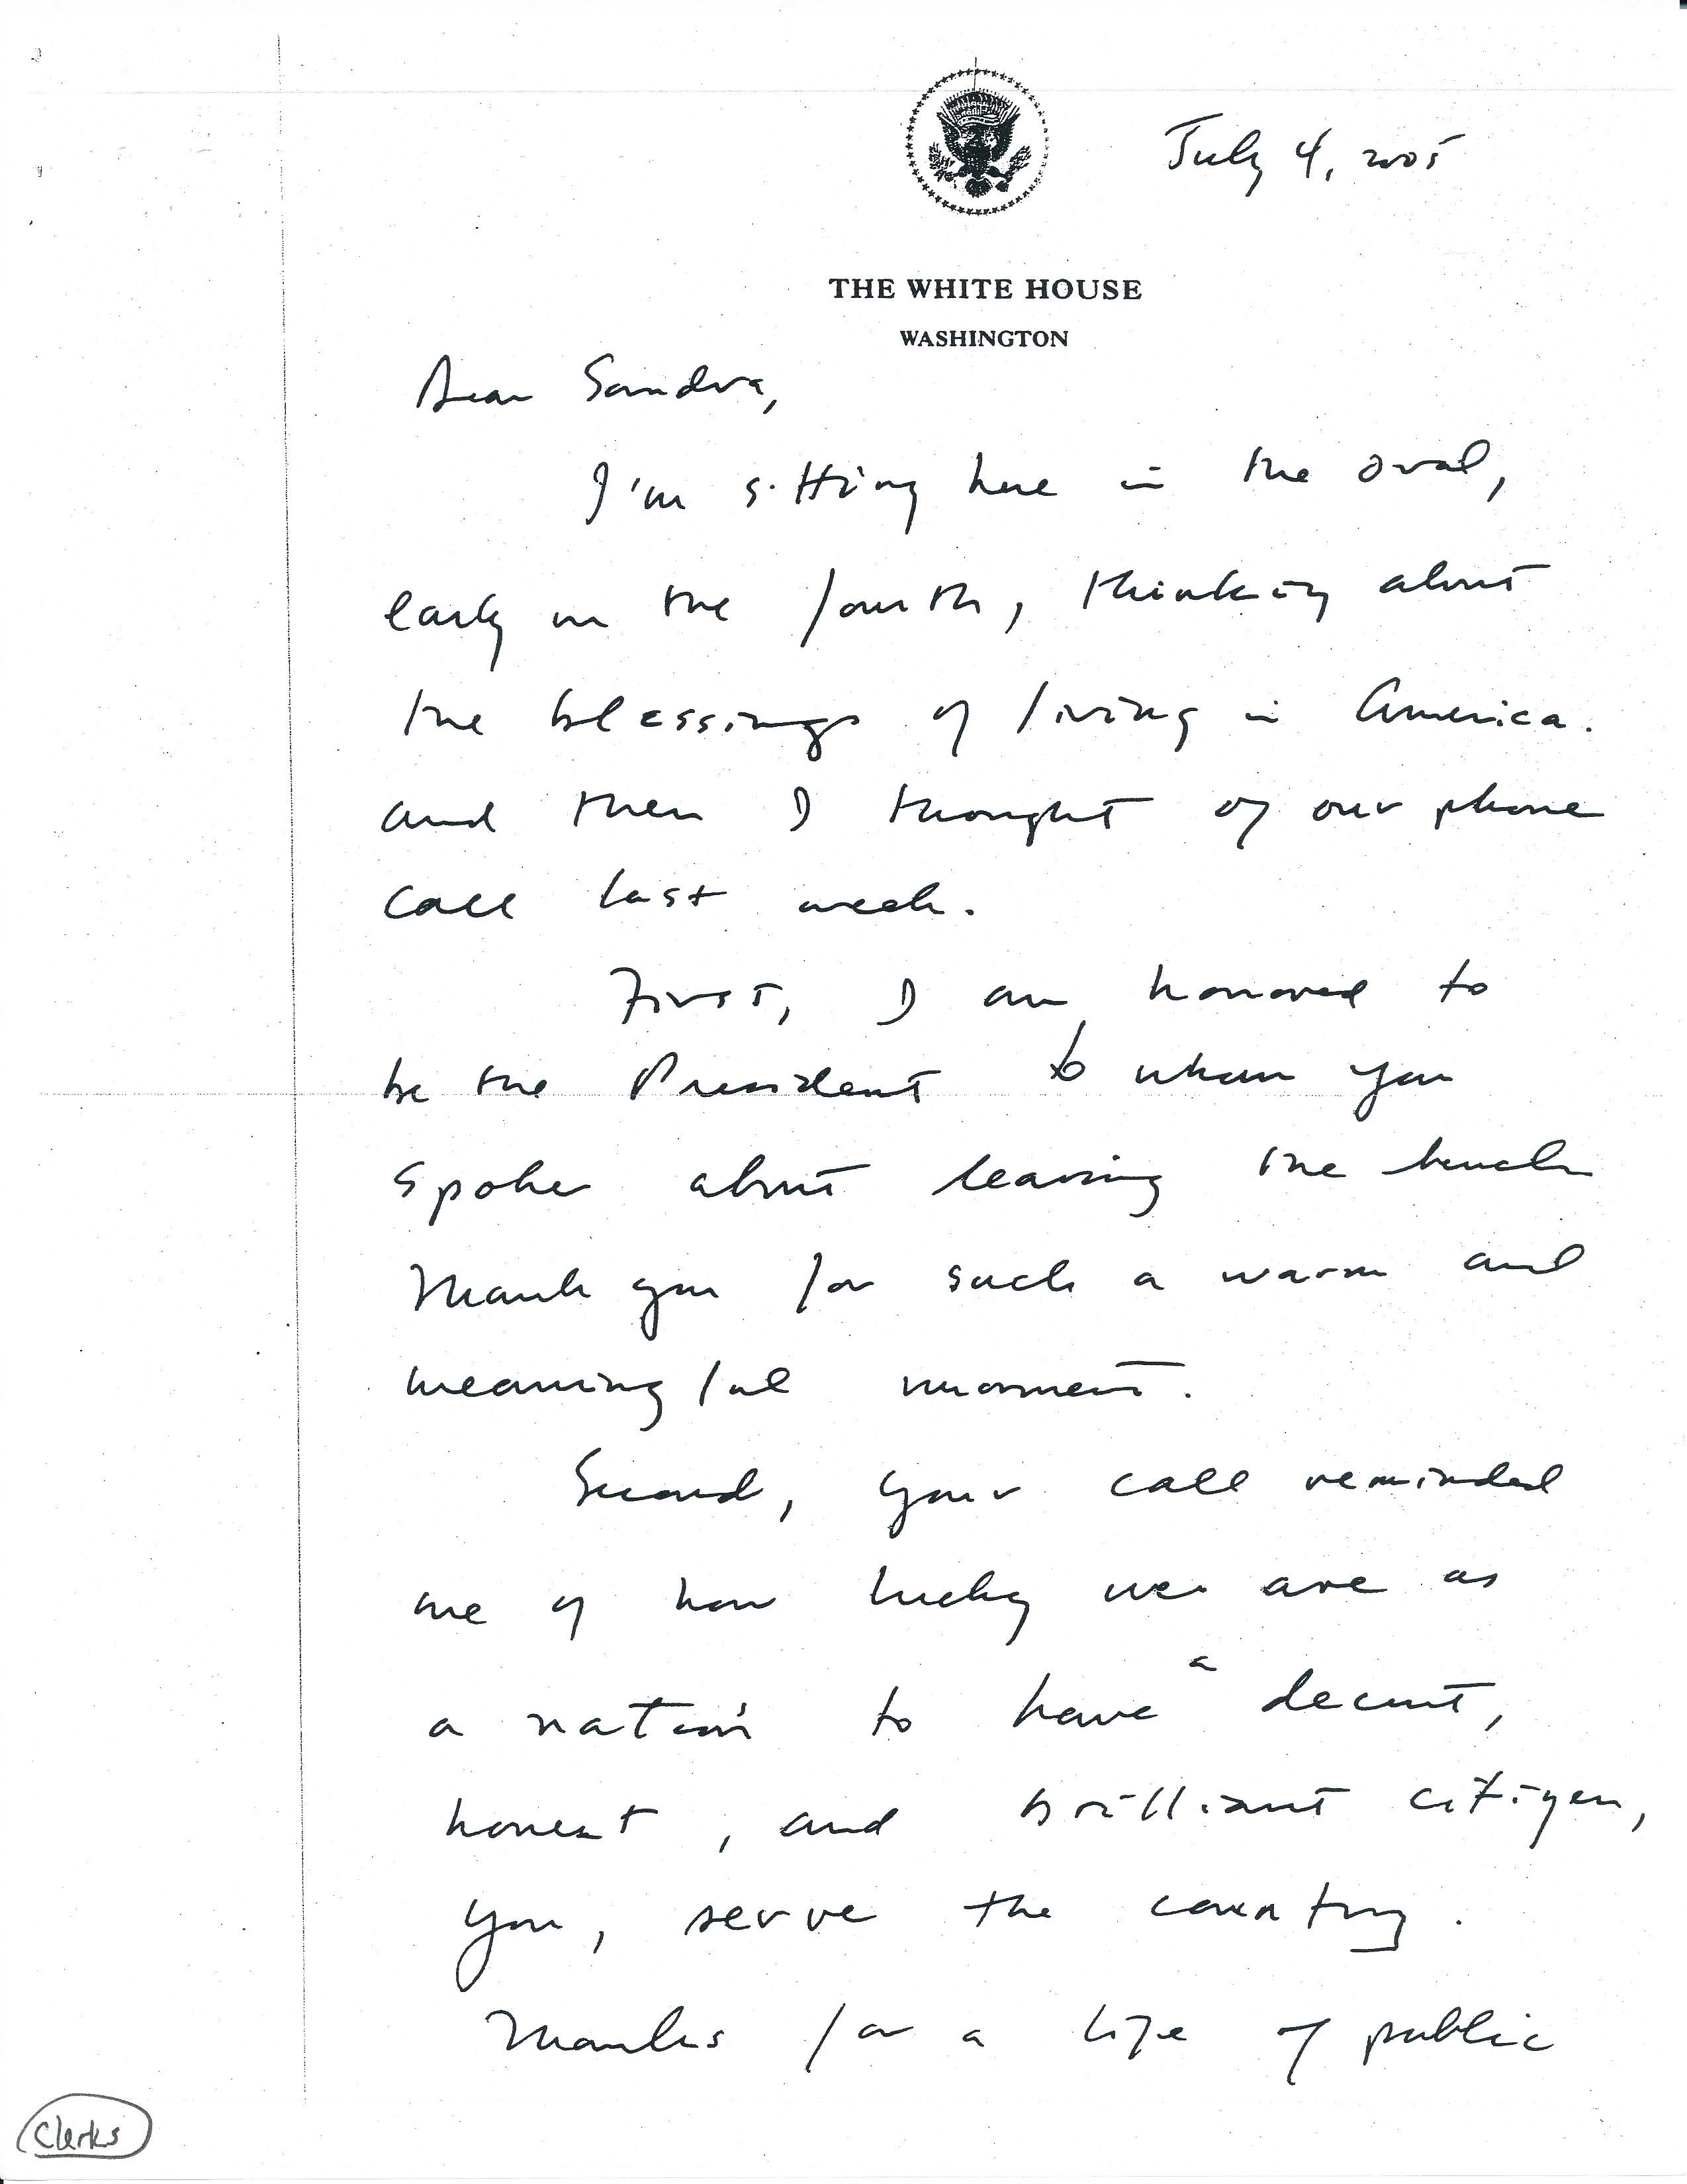 Handwritten letter dated July 4, 2005 to United States Supreme Court Justice Sandra Day O'Connor written by President George W. Bush upon receipt of her resignation. (Page 1 of 2)